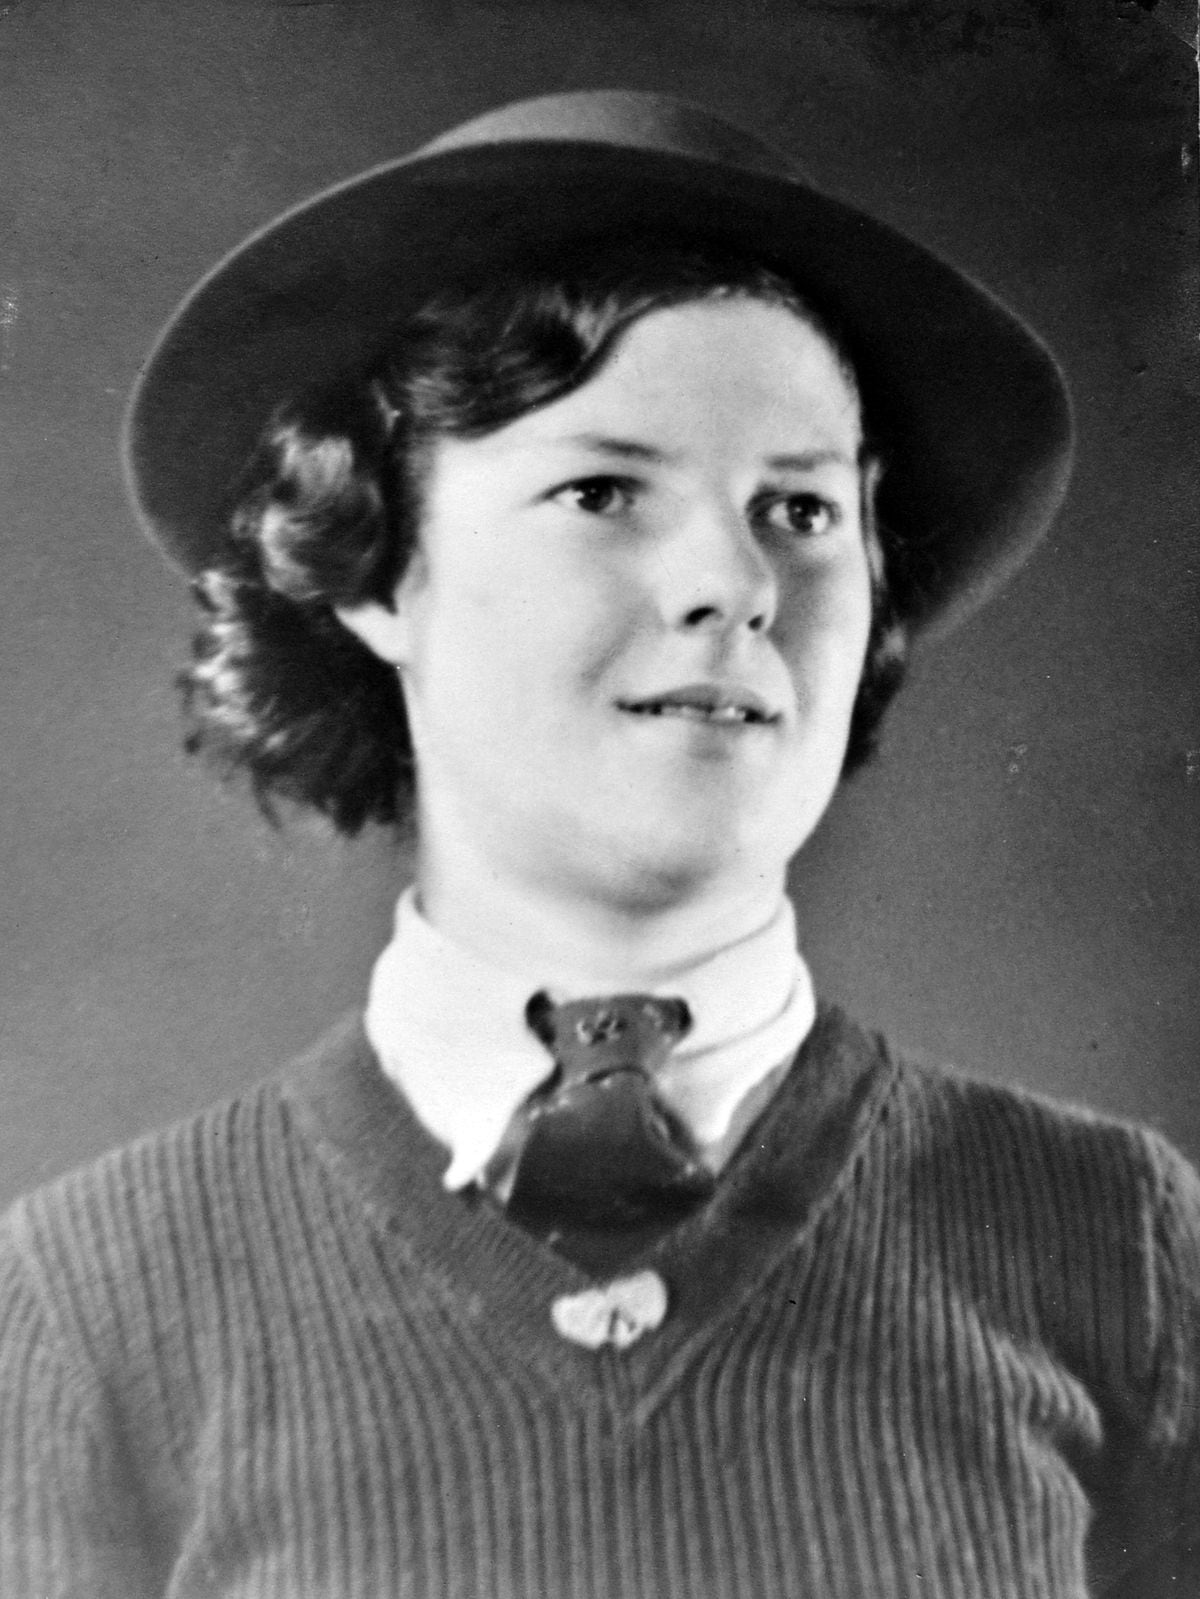 Barbara Price, as she was then, in her uniform